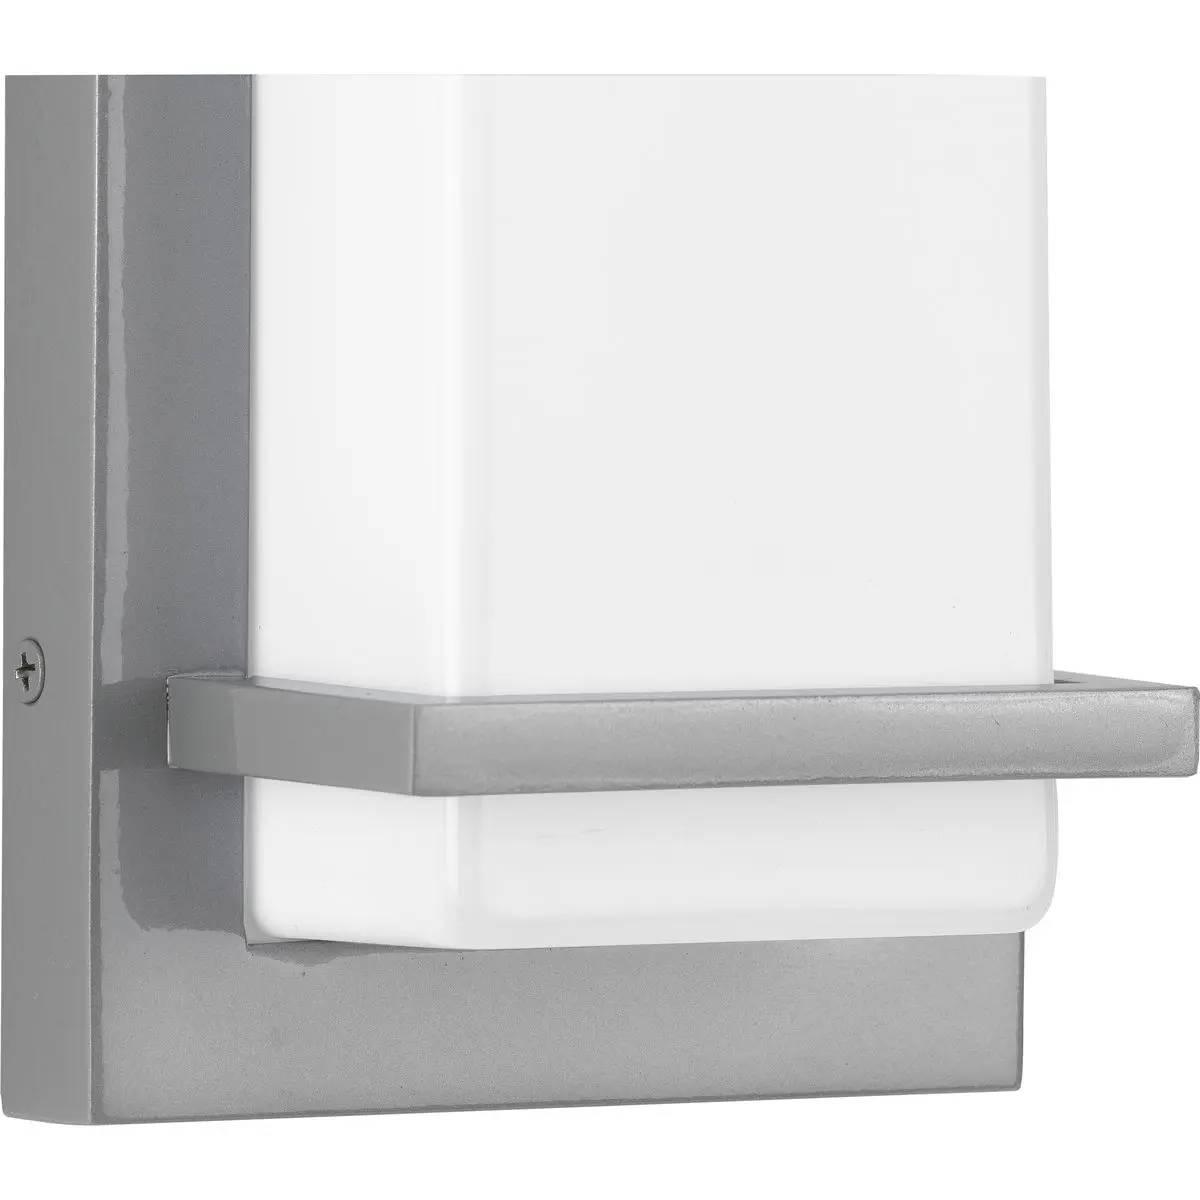 Z-1080 LED 24 in. Outdoor Wall Sconce